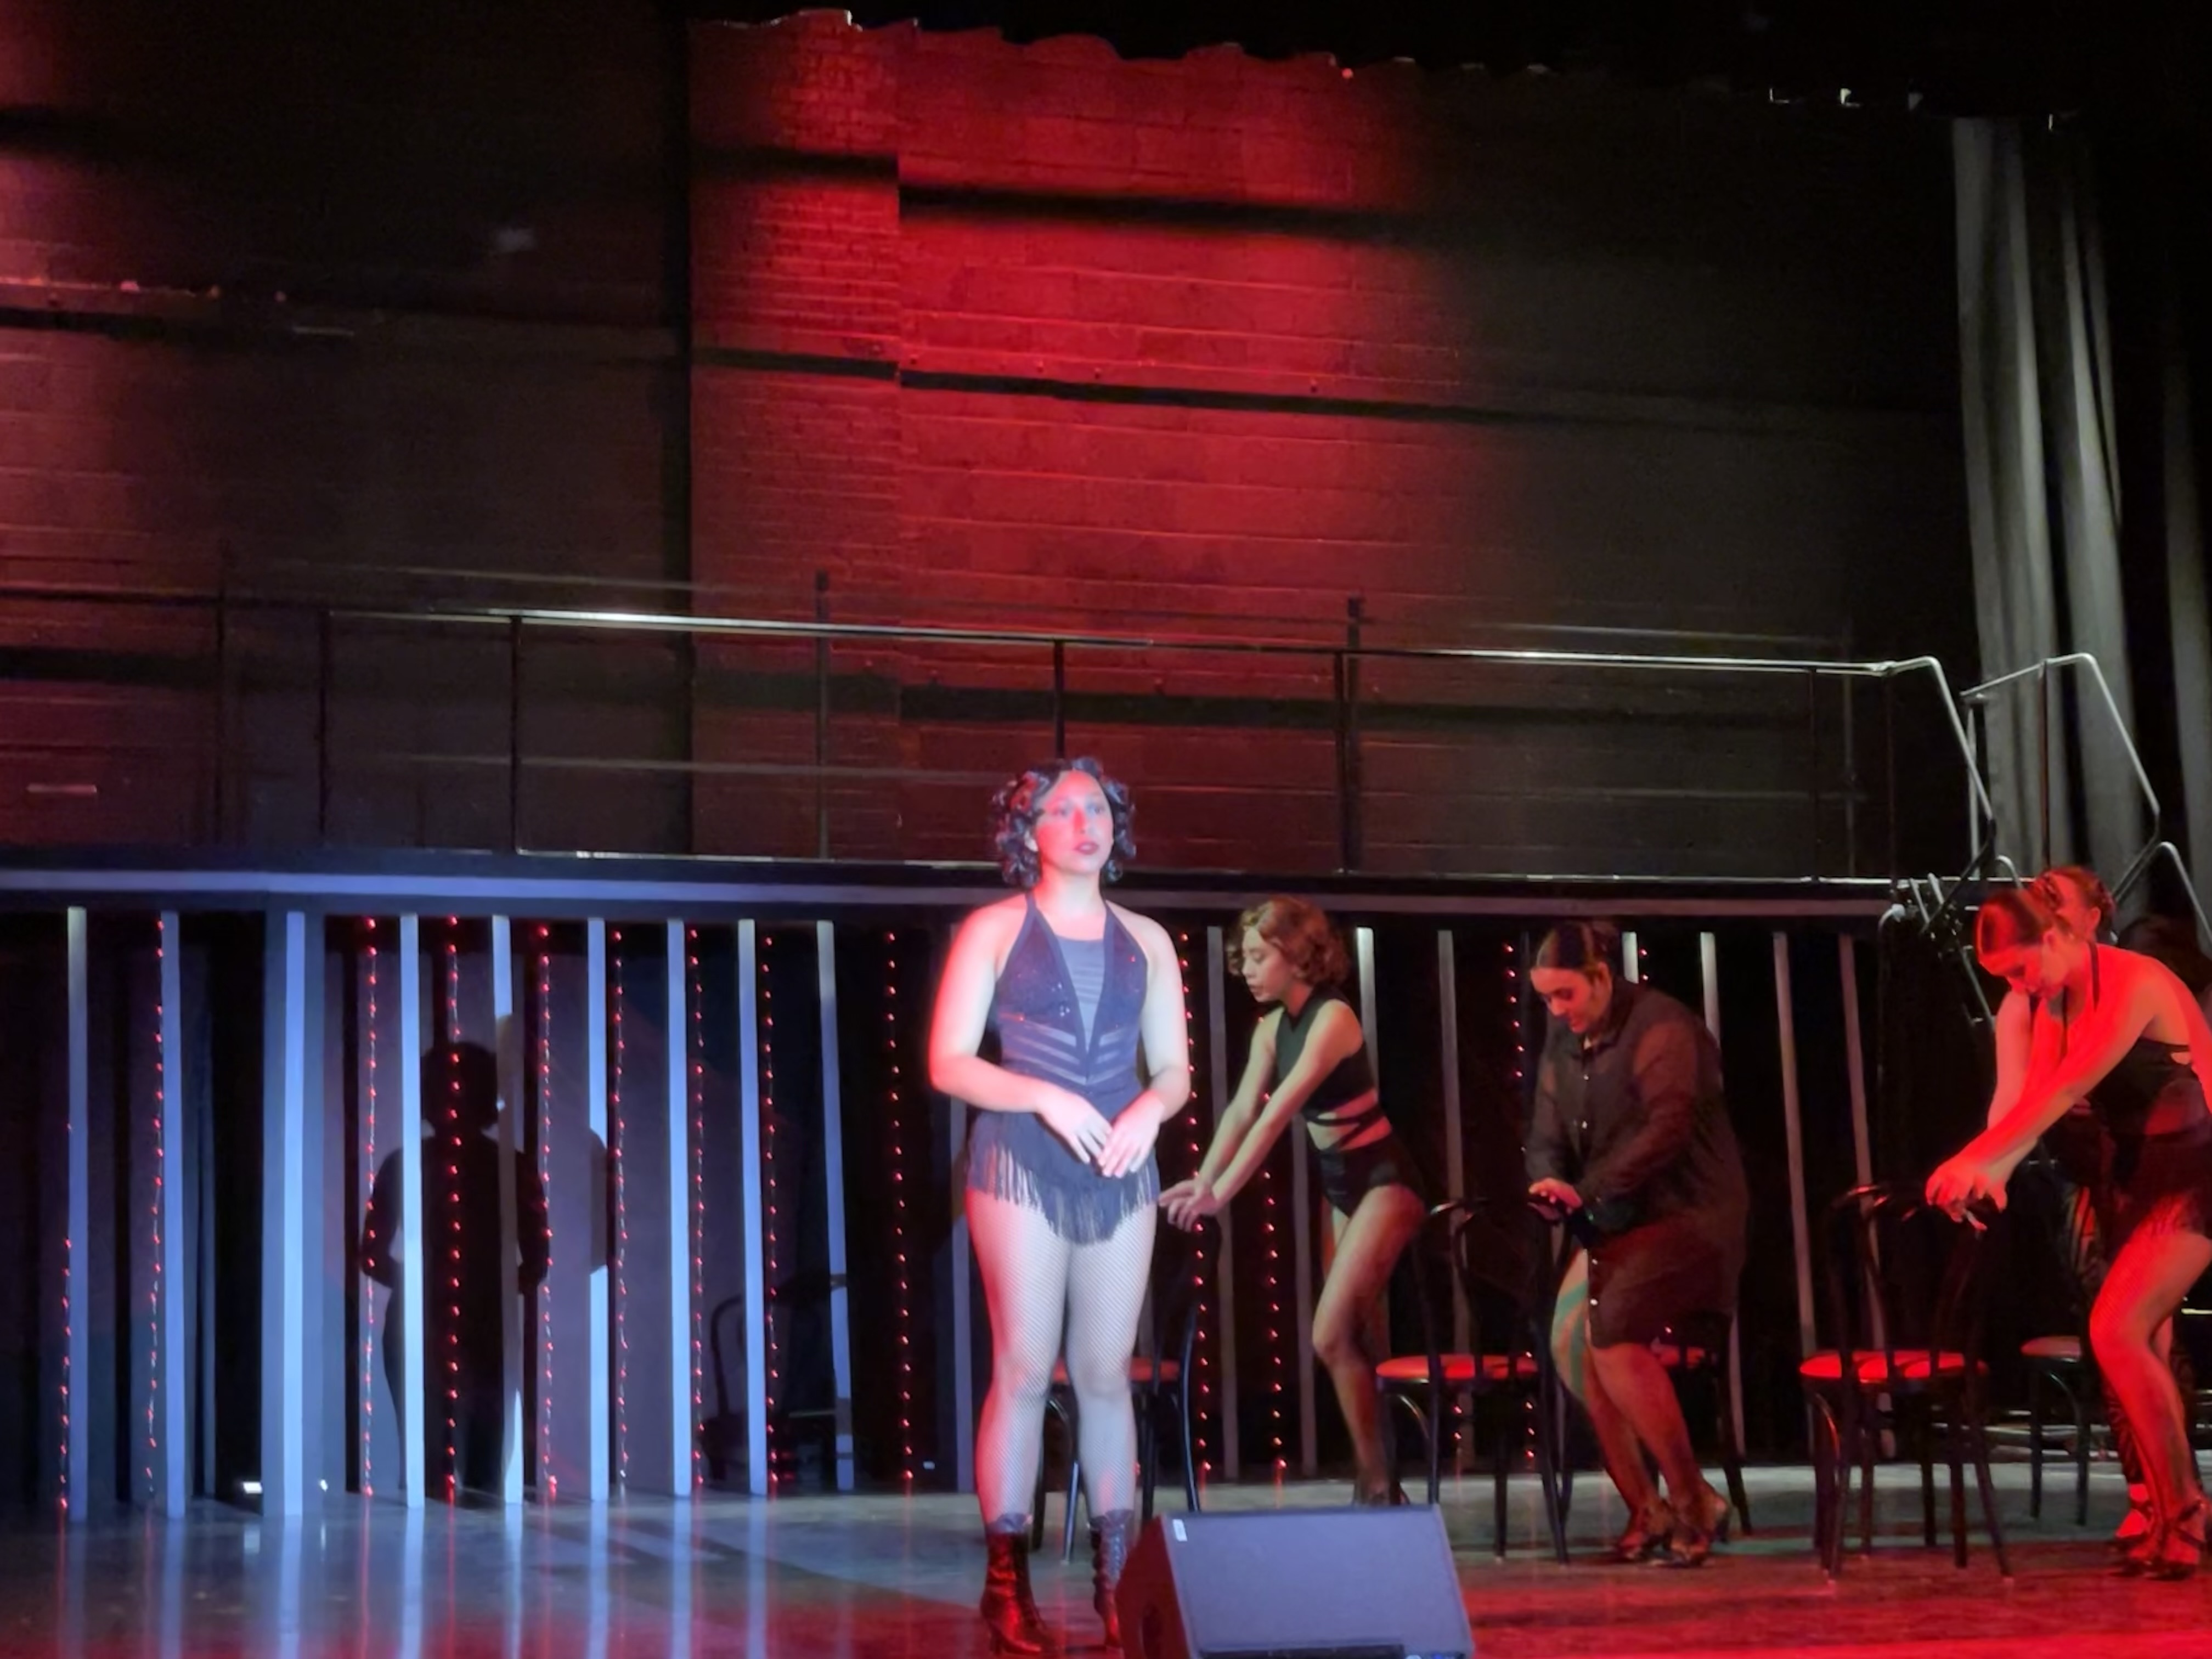 Velma Kelly played by Valeria Flores performing "Cell Block Tango"